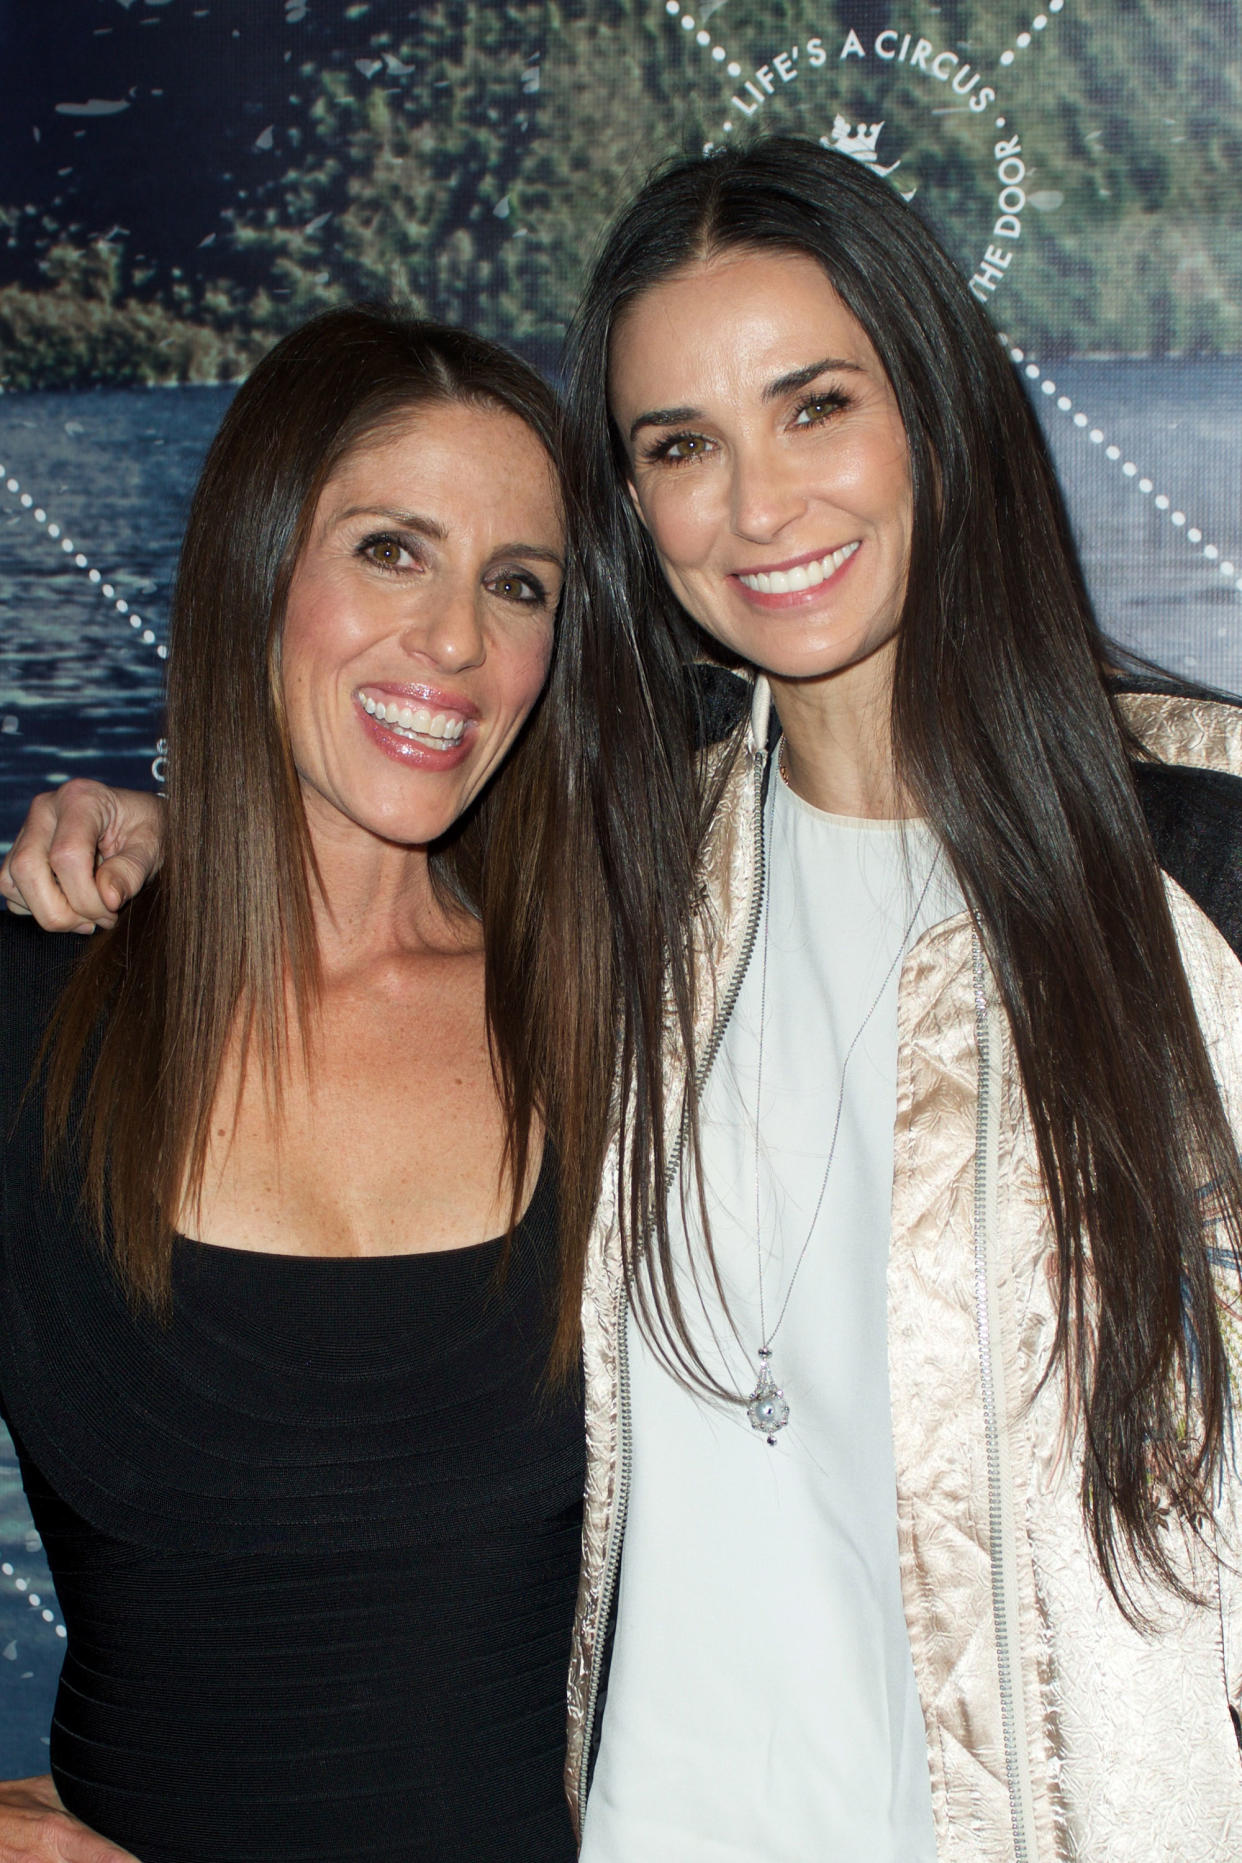 LOS ANGELES, CA - MAY 28:  (L-R) Company partner Soleil Moon Frye and actress Demi Moore attend the unveiling of Seedling's Arts District headquarters on May 28, 2015 in Los Angeles, California.  (Photo by Keipher McKennie/WireImage)